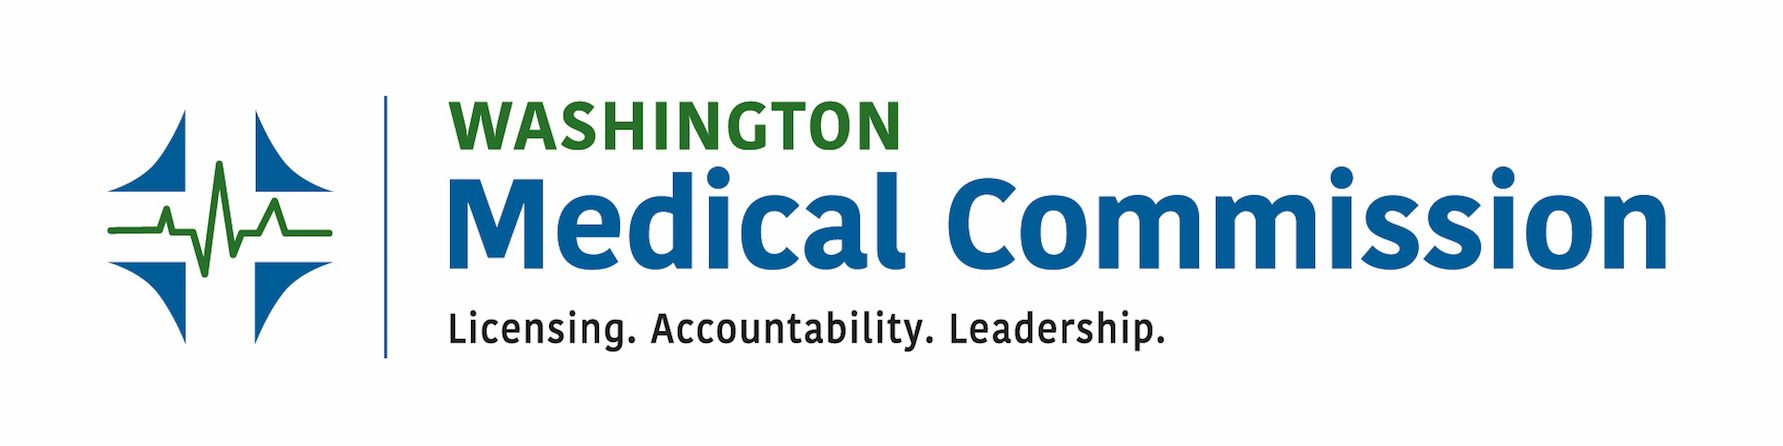 medical subscriber preferences washington commission updates enter access below please sign contact information